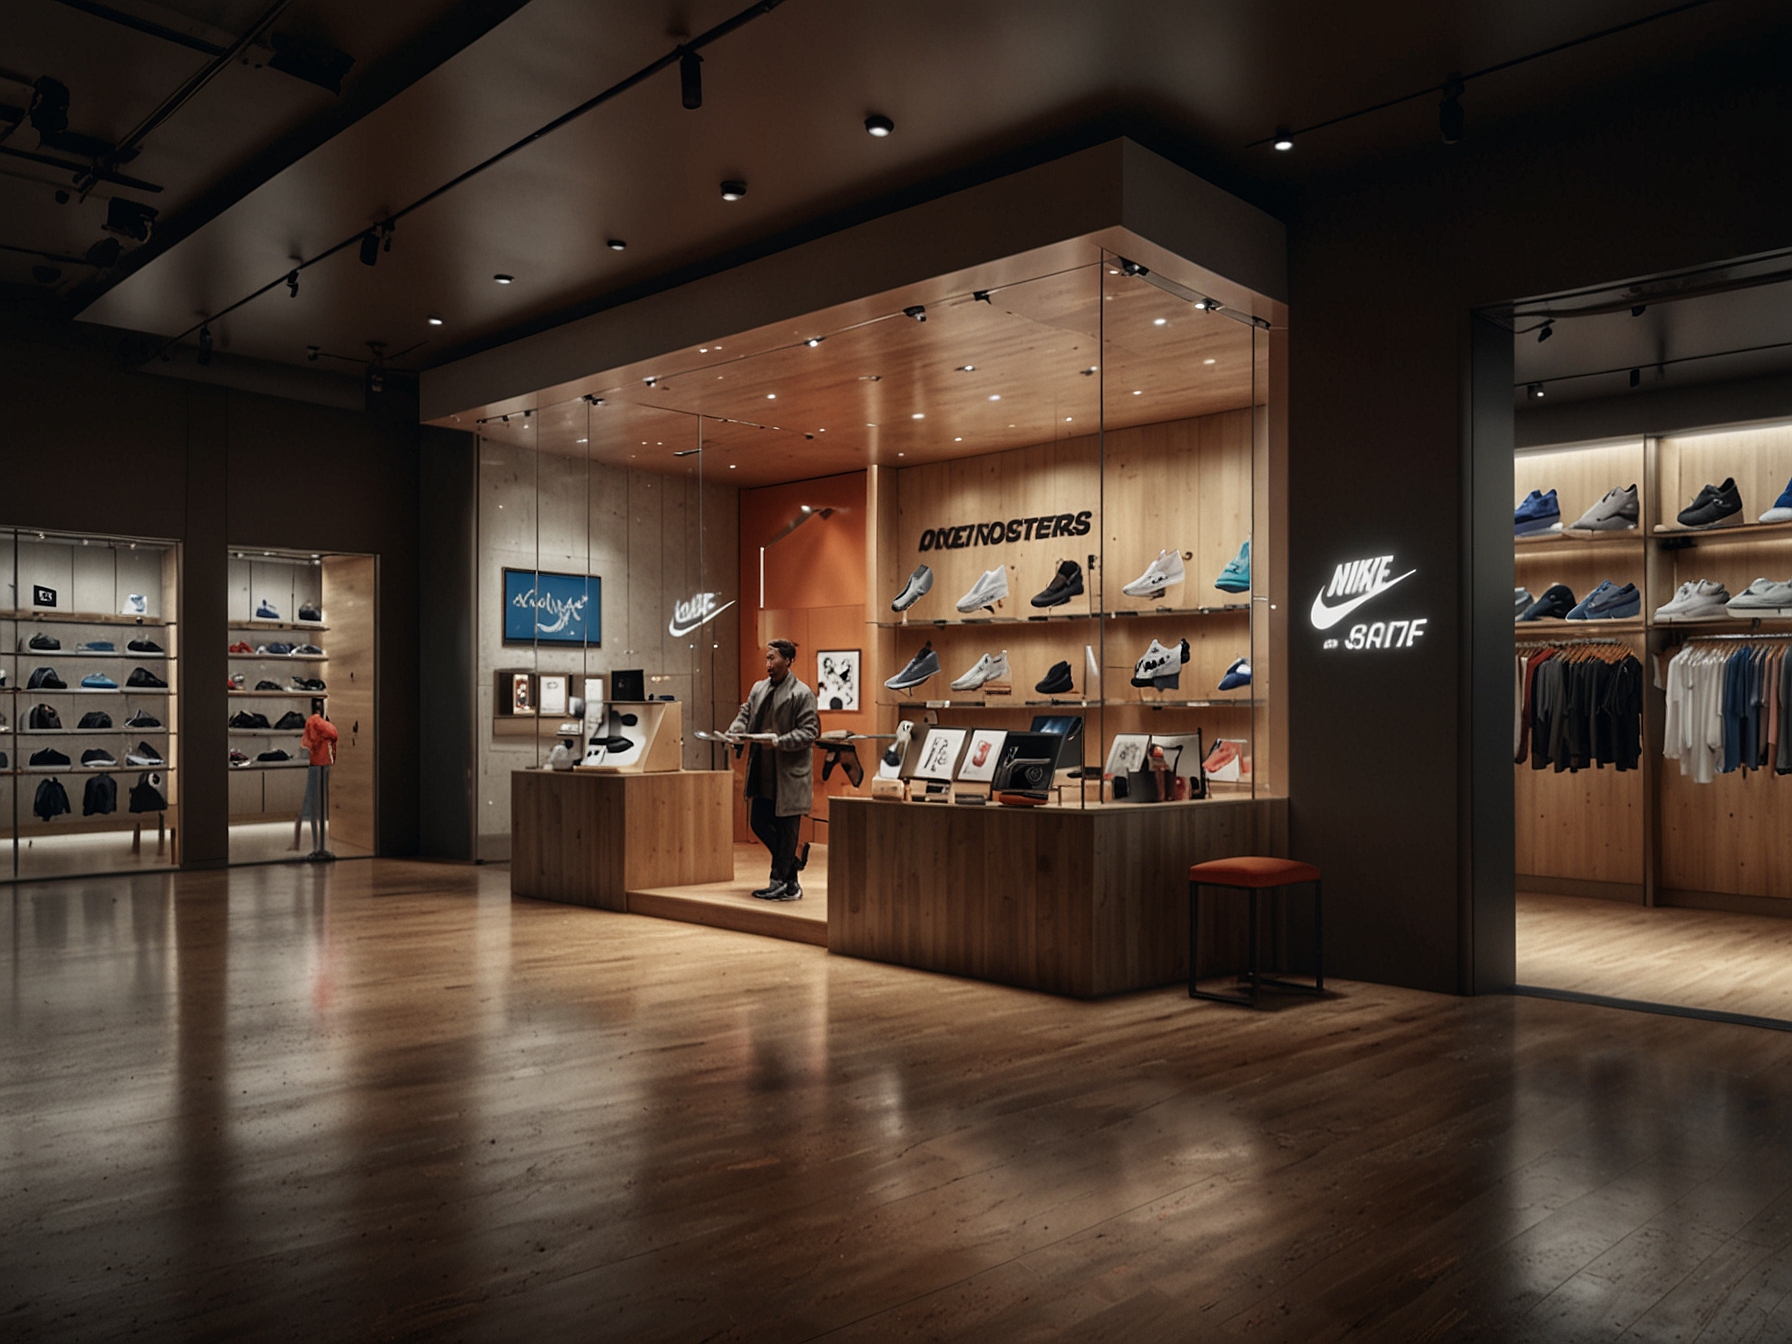 A Nike store with visible branding and customers, representing consumer engagement and direct-to-consumer strategies that the company hopes will bolster its financial performance.